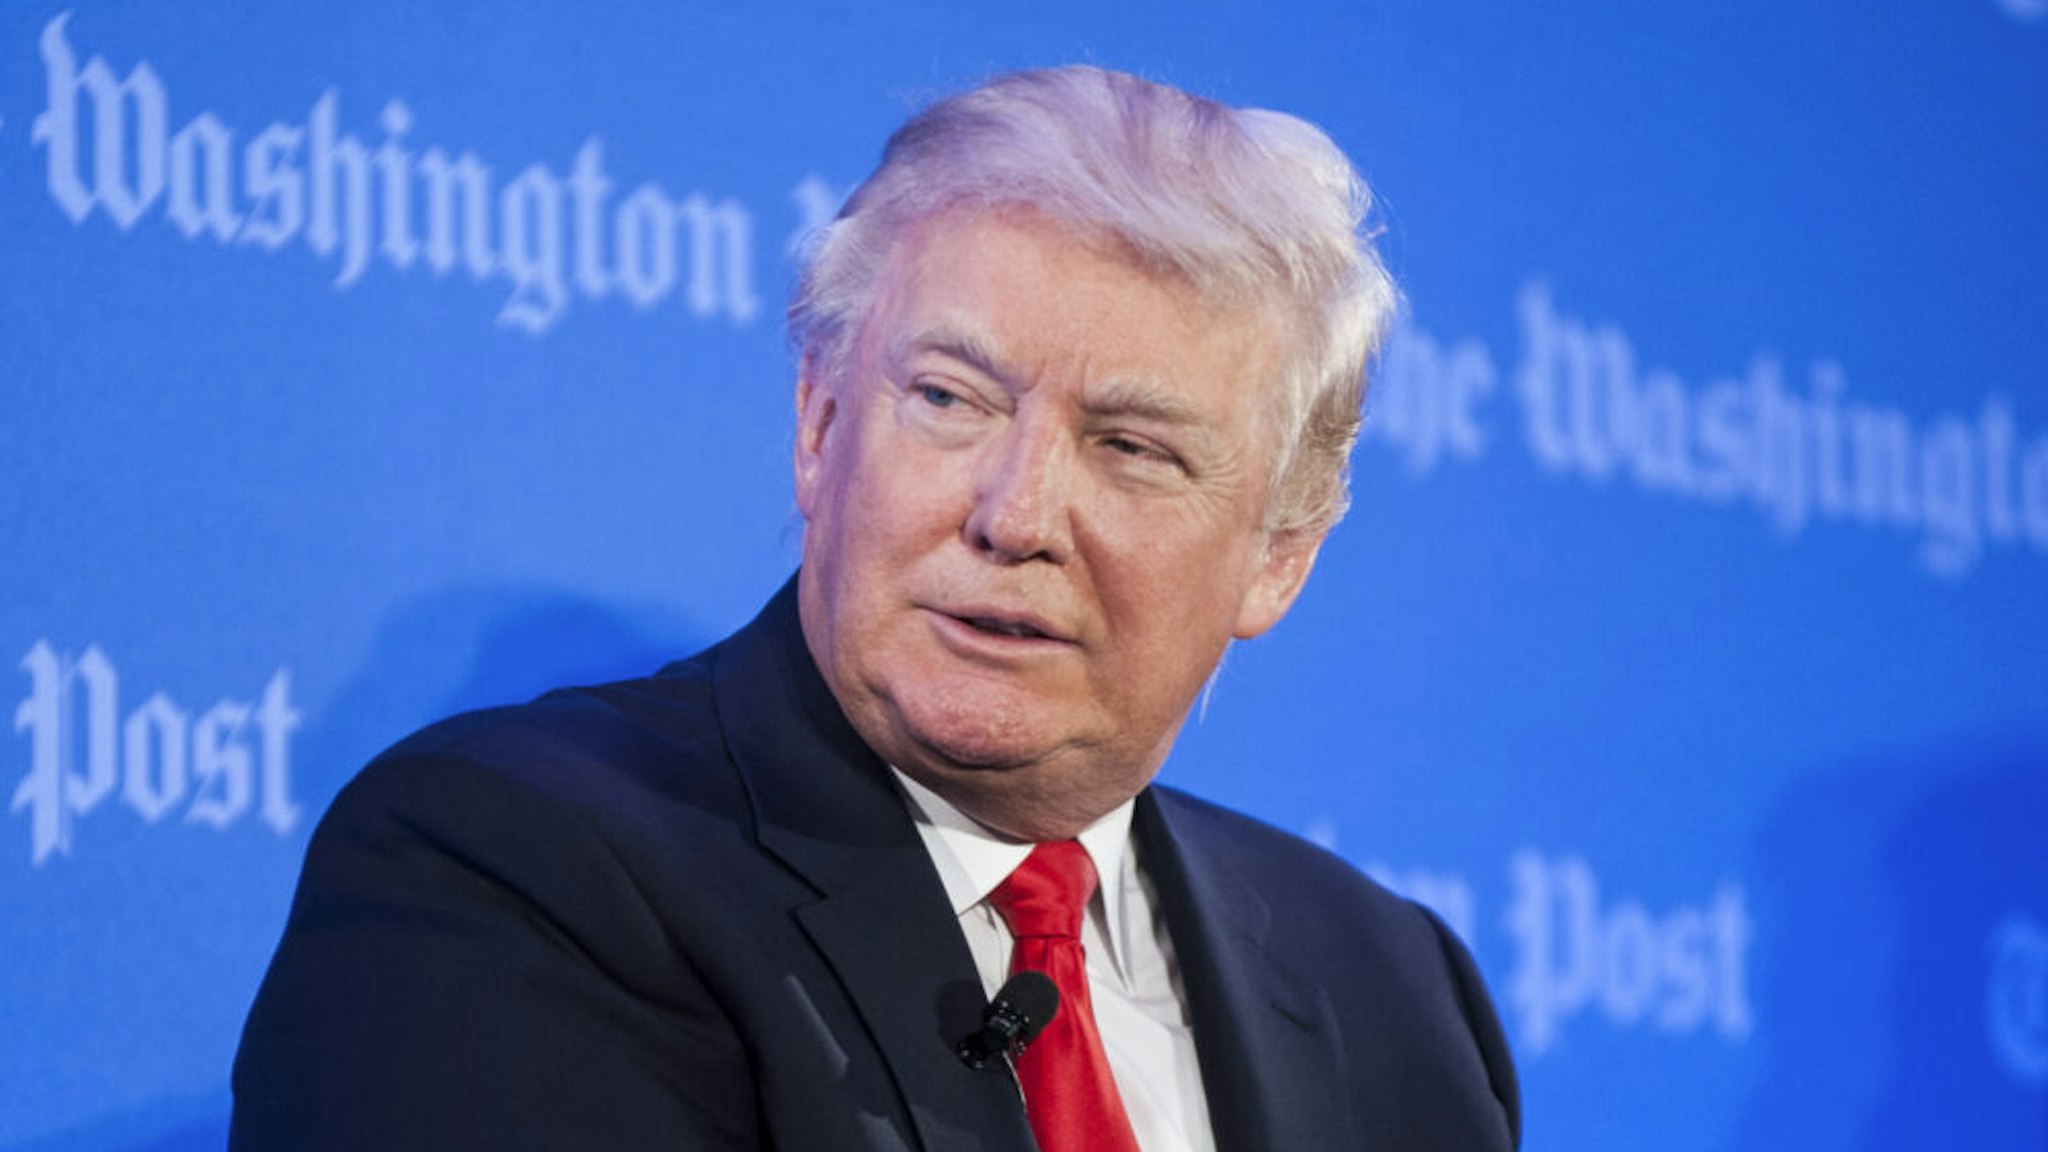 WASHINGTON, DC - APRIL 10: Donald Trump speaks during a forum on "Washington real estate -- including plans to renovate the landmark Old Post Office on Pennsylvania Avenue and views on property values and trends in Washington." at Washington Post on April 10, 2013 in Washington, DC.